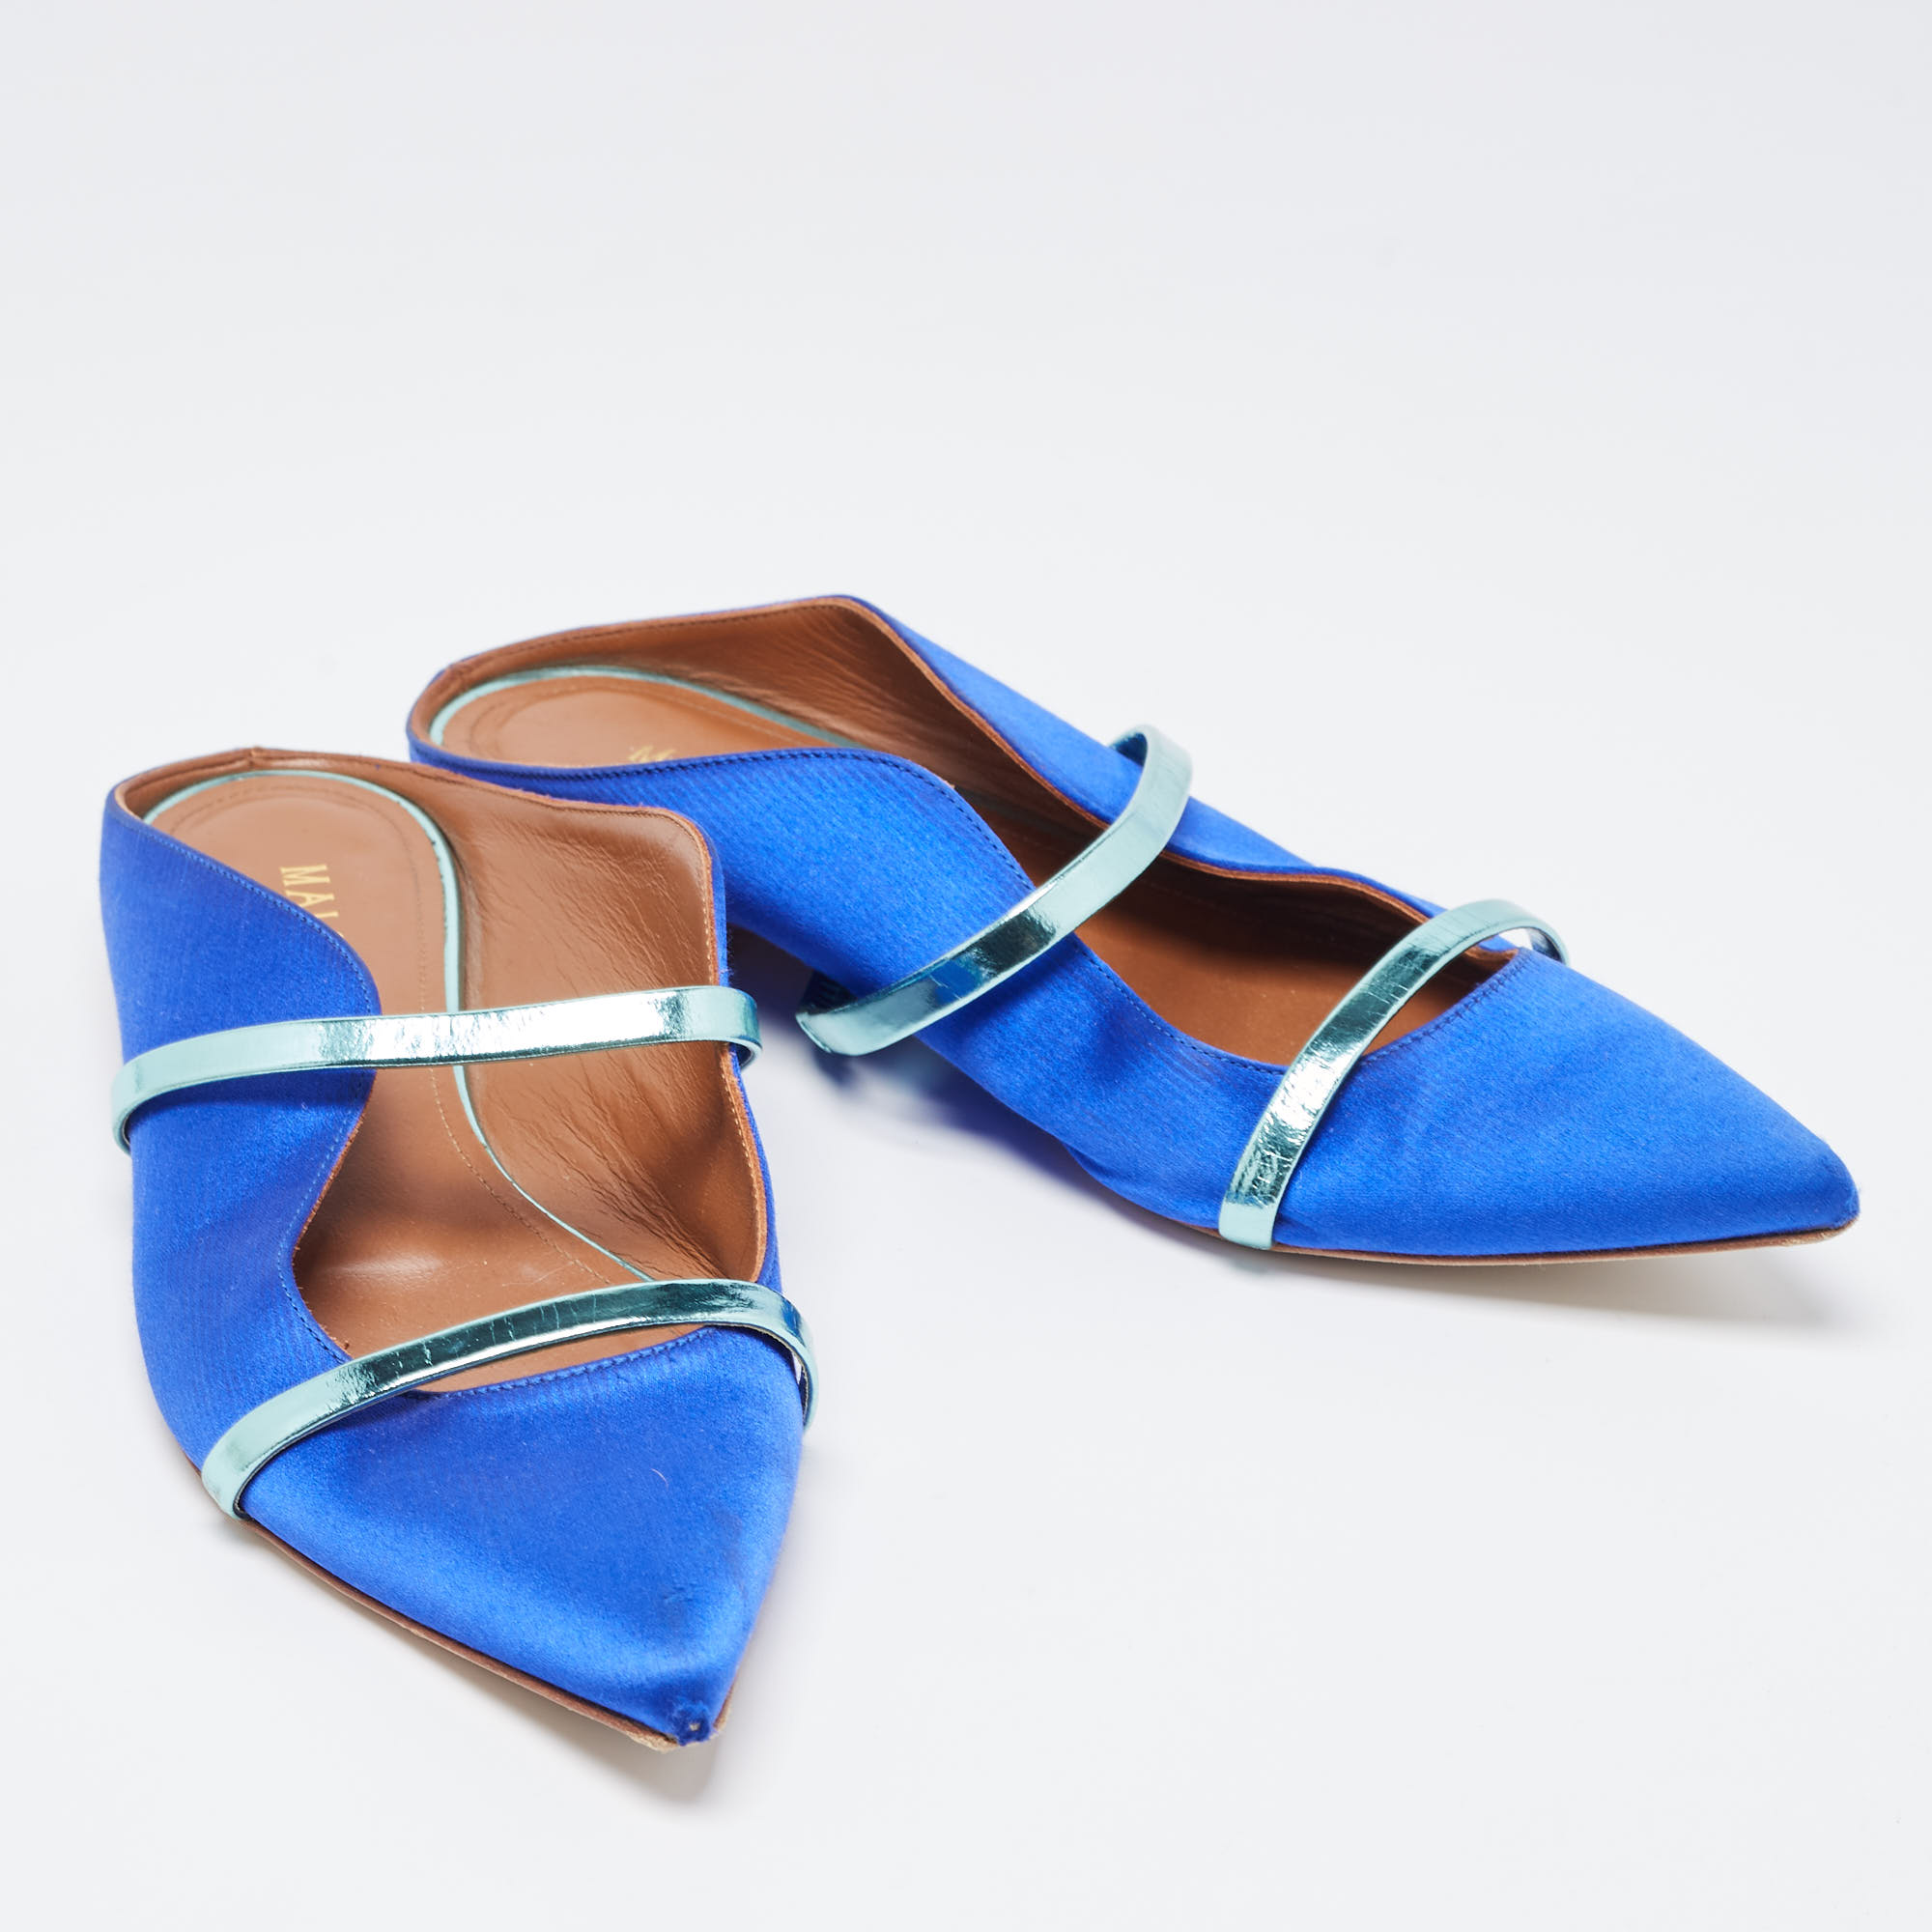 Malone Souliers Blue/Metallic Satin And Leather Maureen Flats Size 37